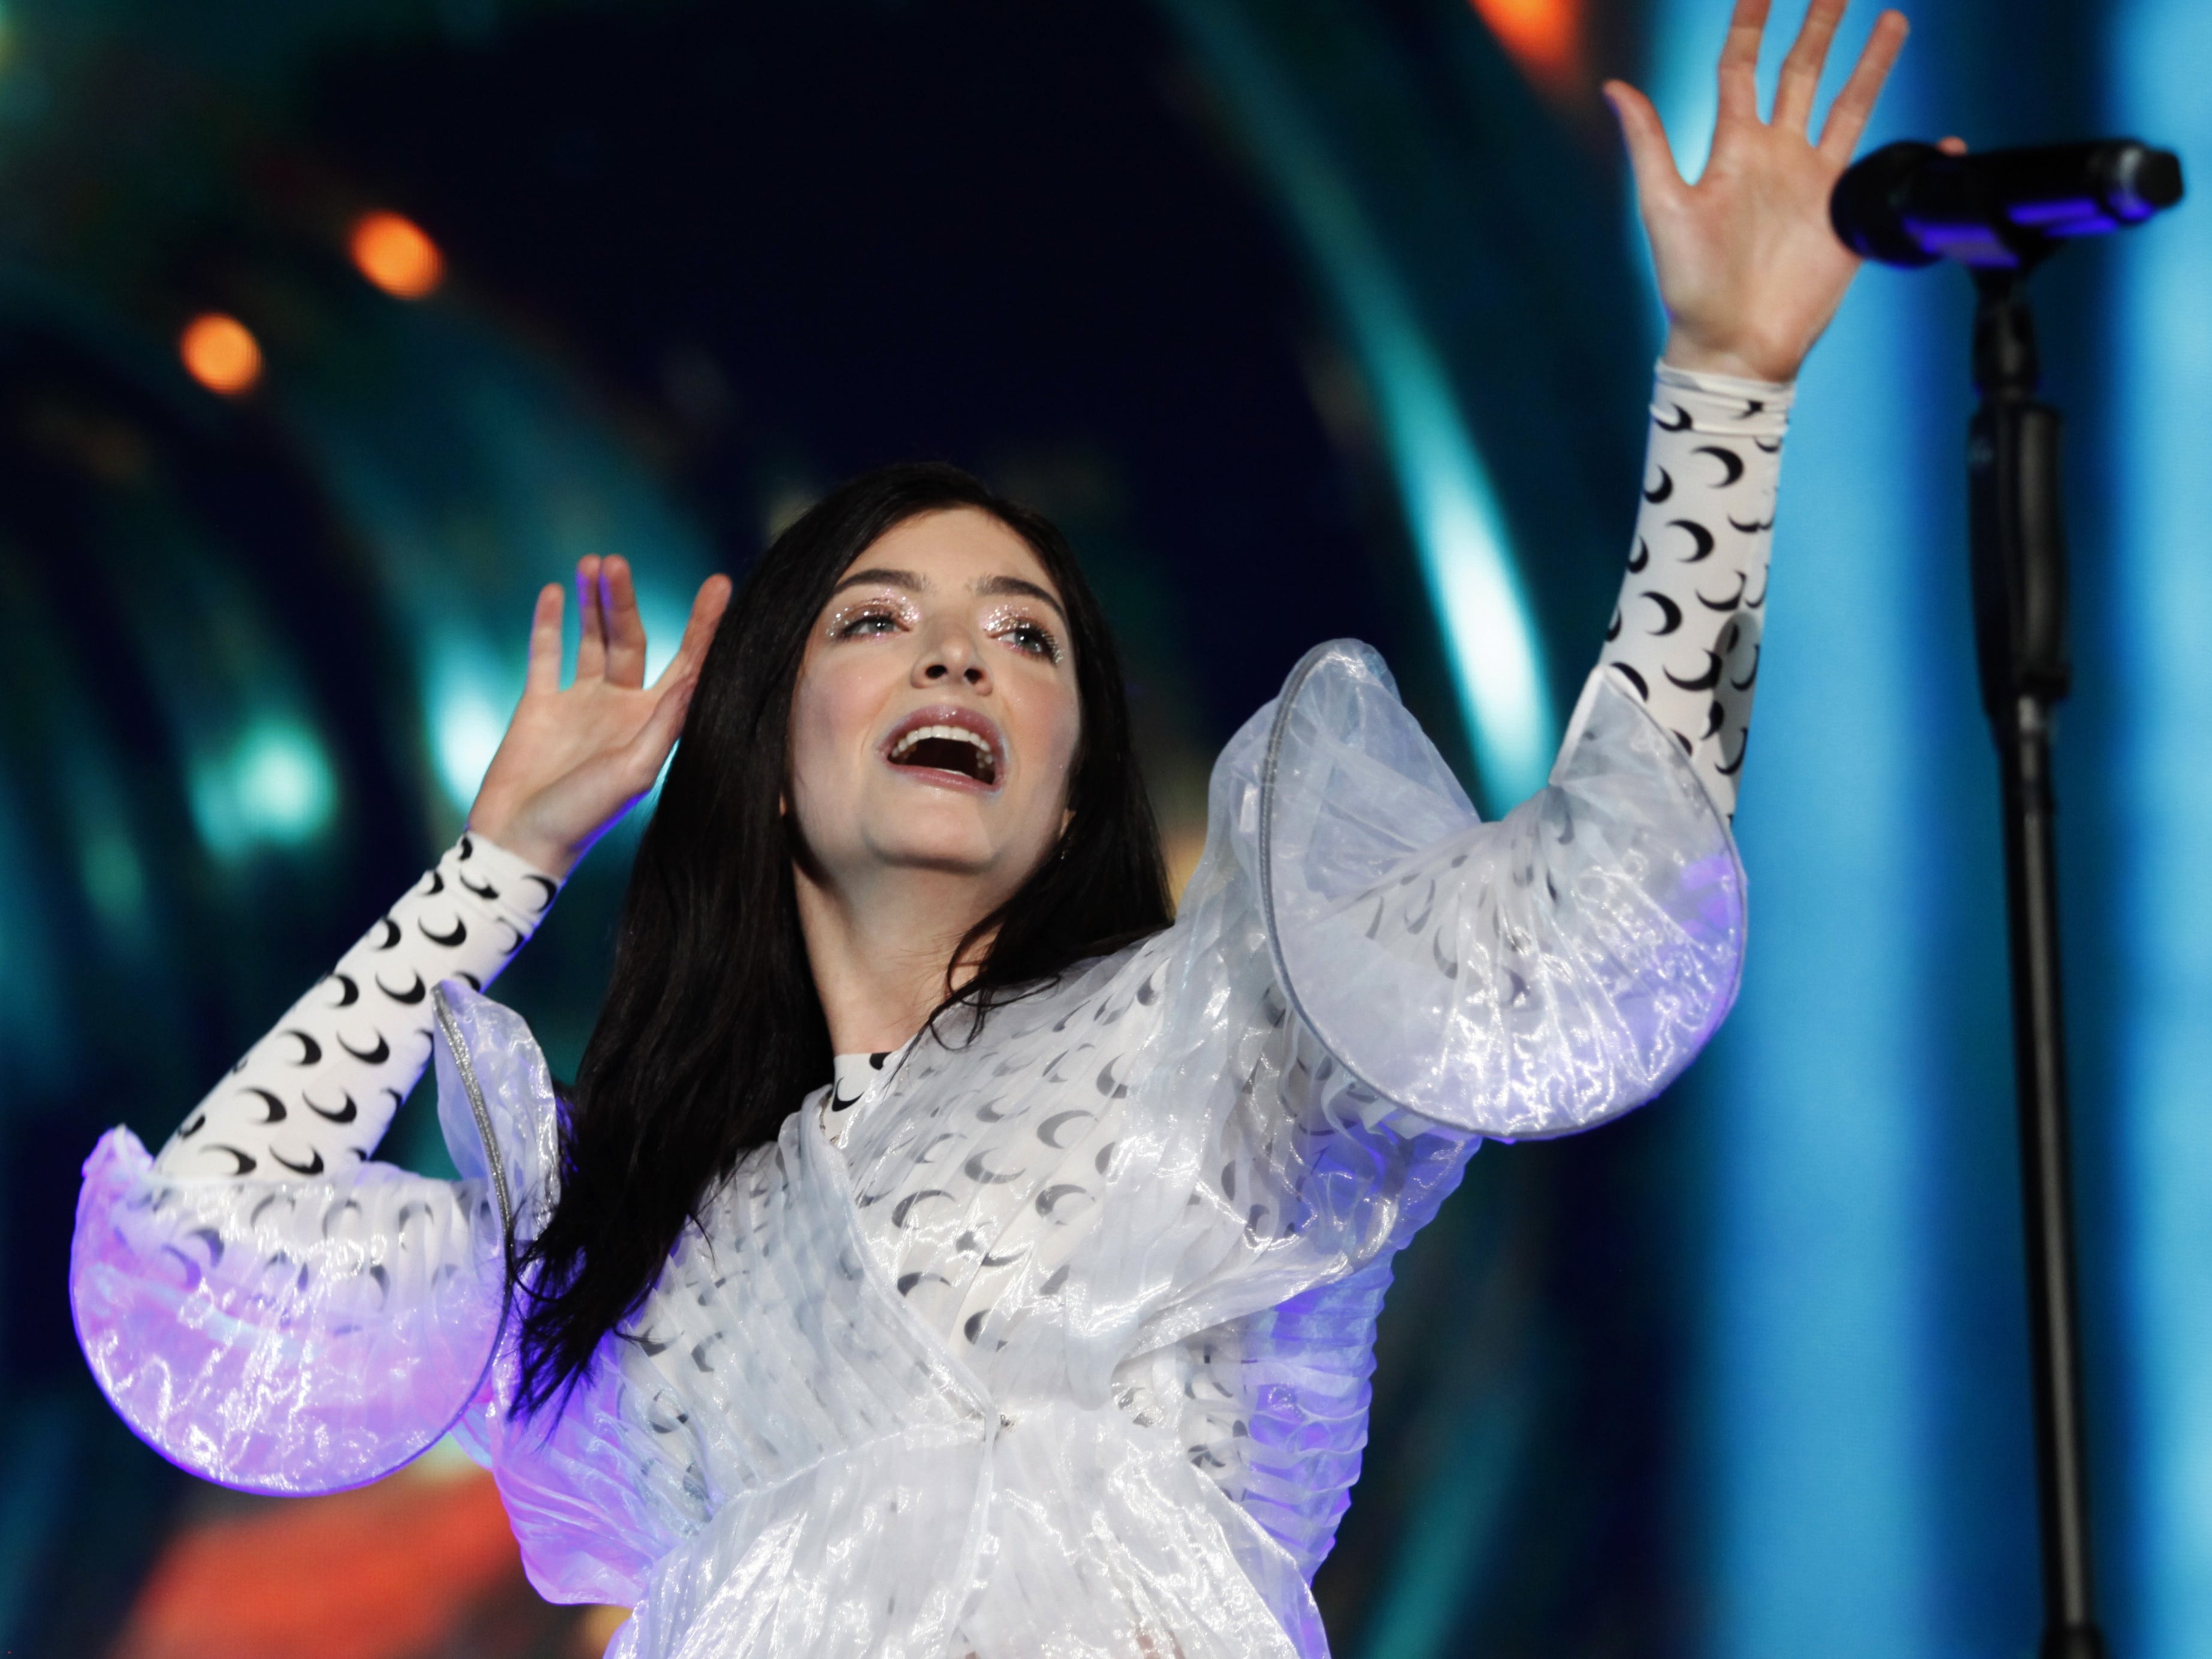 Lorde performs at the Corona Capital music festival in Mexico City on 17 November 2018